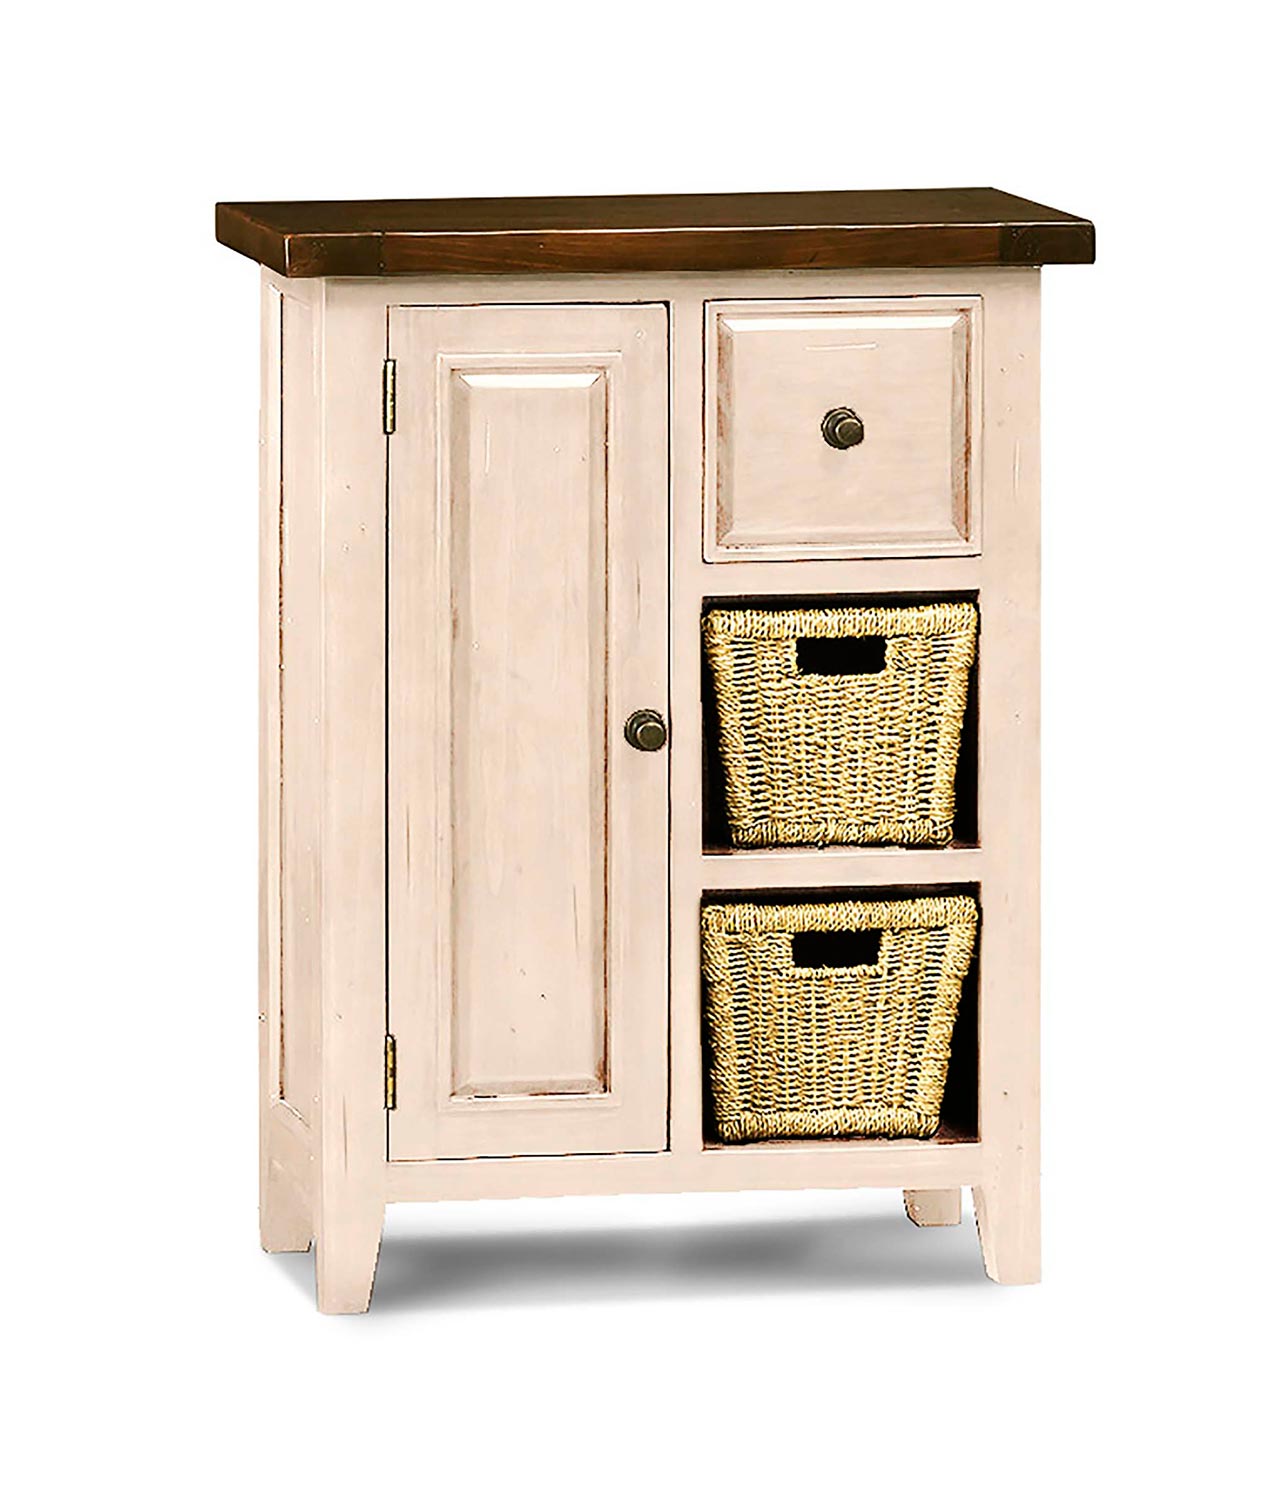 Hillsdale Tuscan Retreat Coffee Cabinet with 2 Shelf/Baskets - Country White